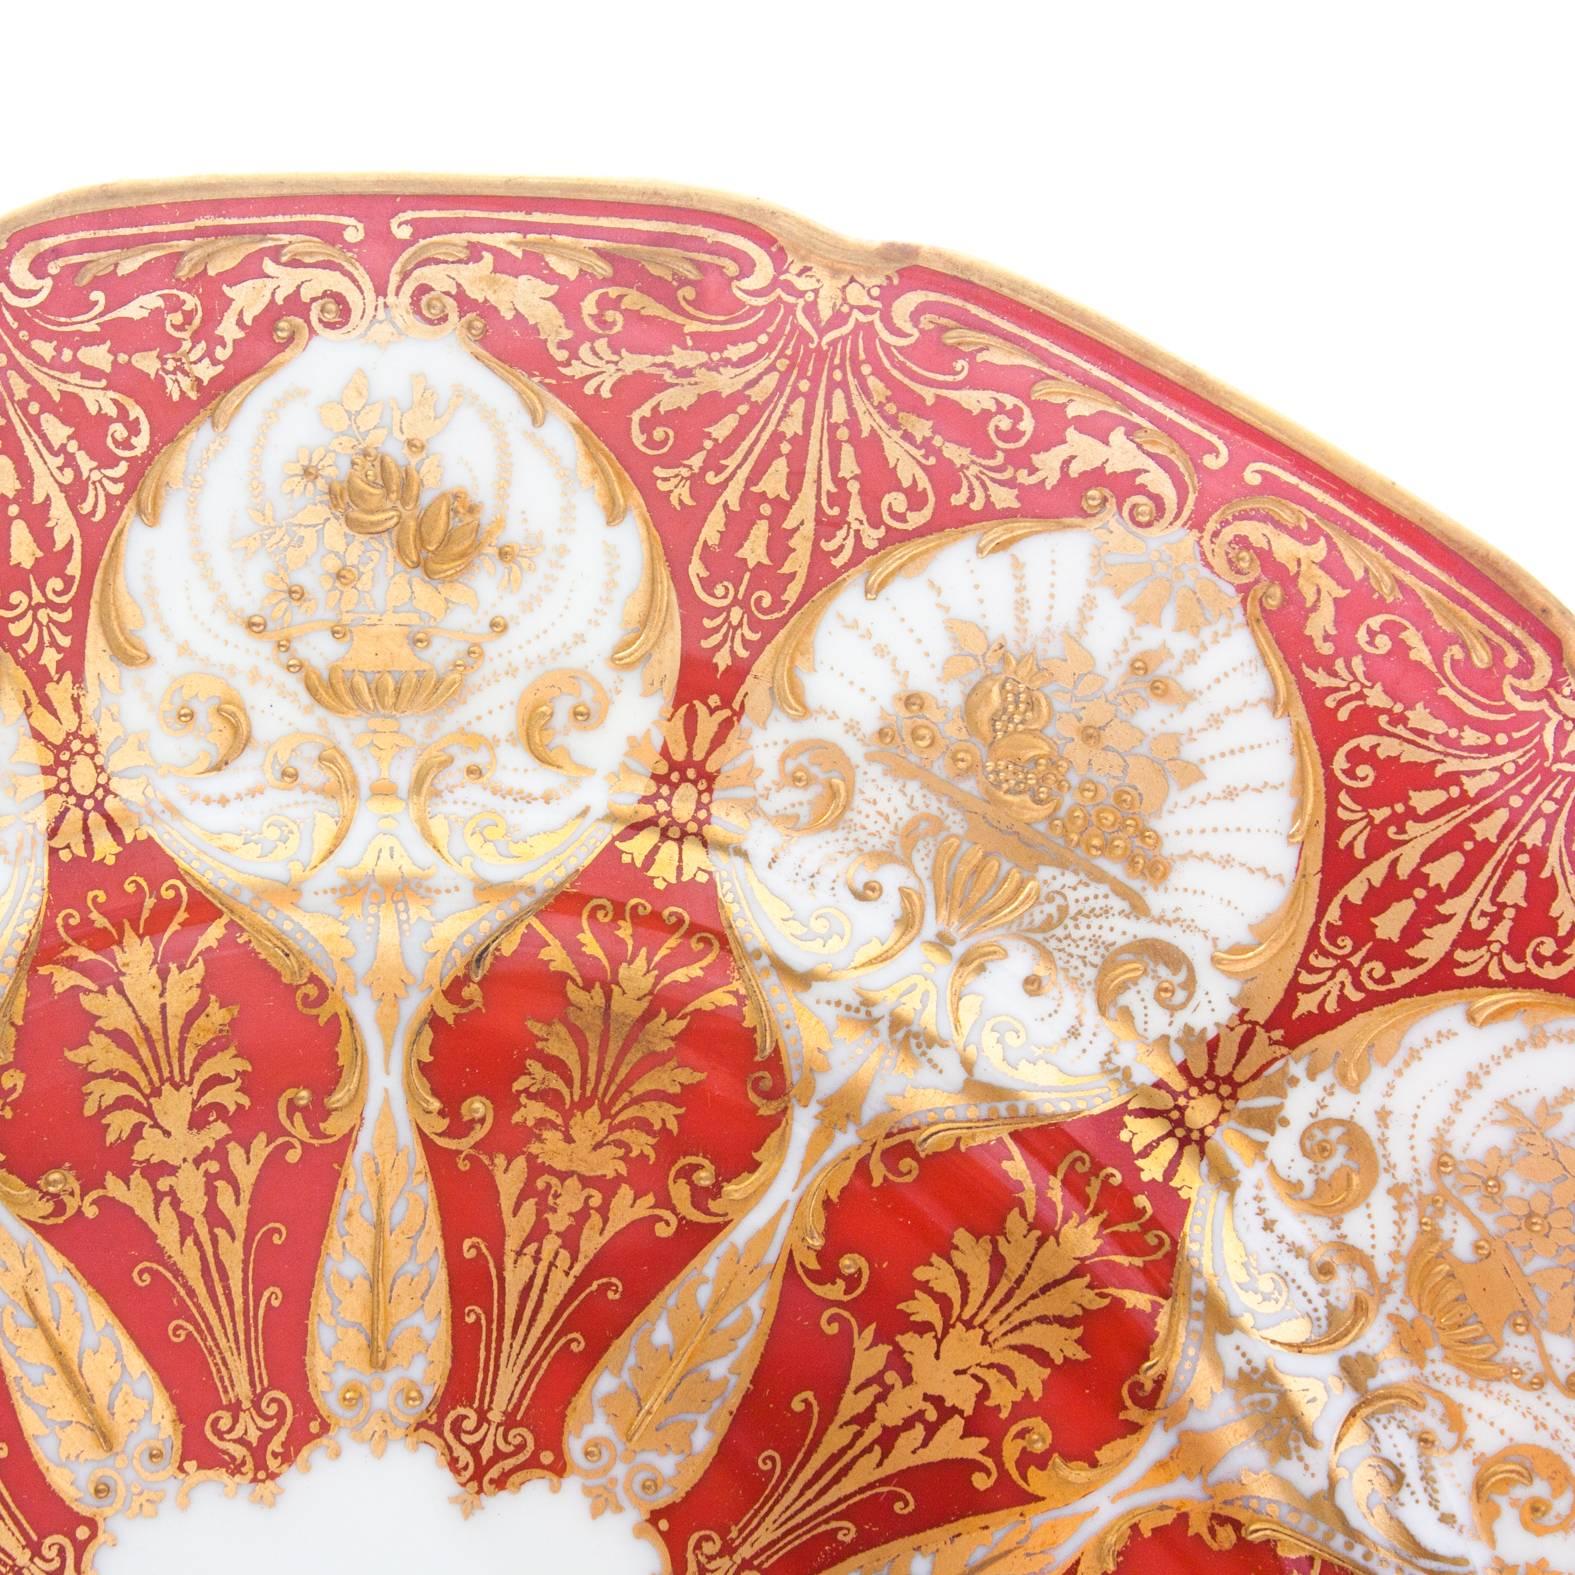 A vibrant and unique set of 12 plates by Royal Doulton, England. Raised and designed with a lavishly heavy hand tooled gilding technique on a hard to find orange ground. A Classic Robert Allen shape and in lovely antique condition. Hallmarked by the